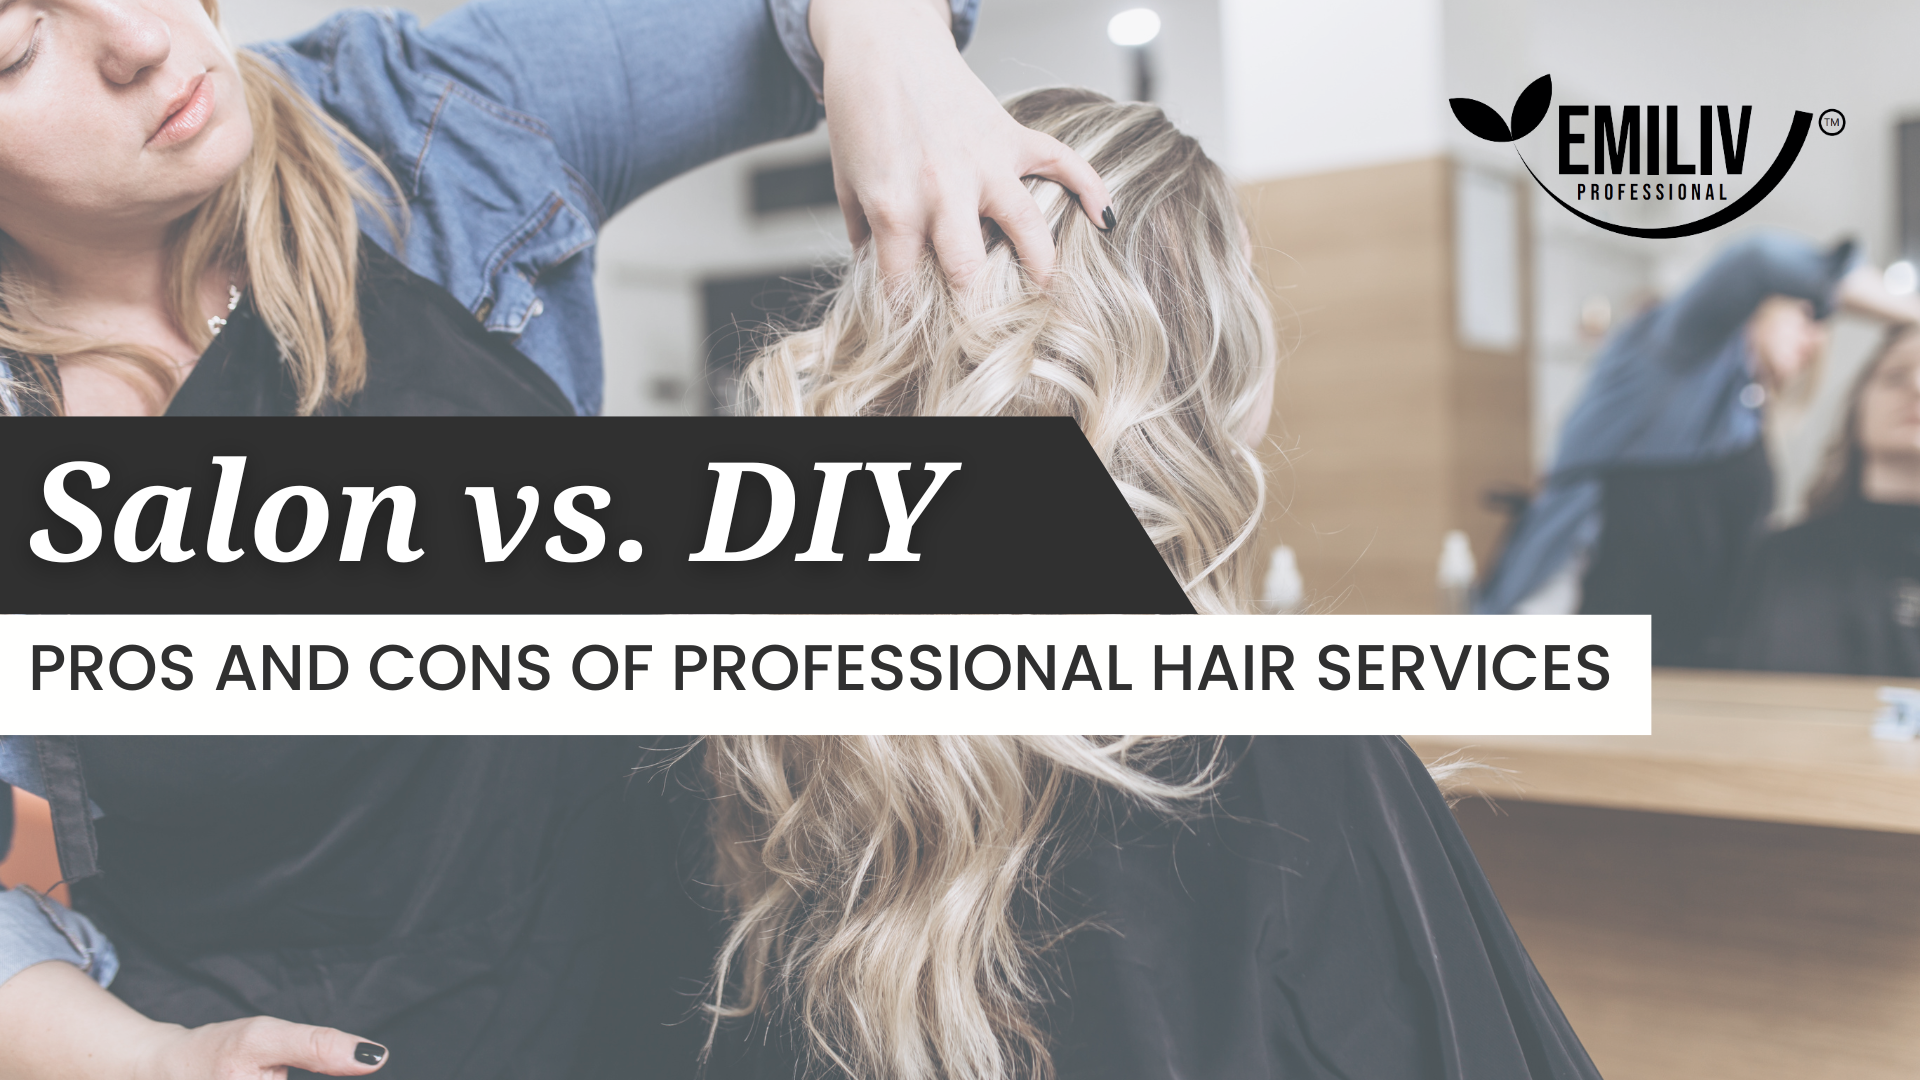 Salon vs. DIY: Pros and Cons of Professional Hair Services